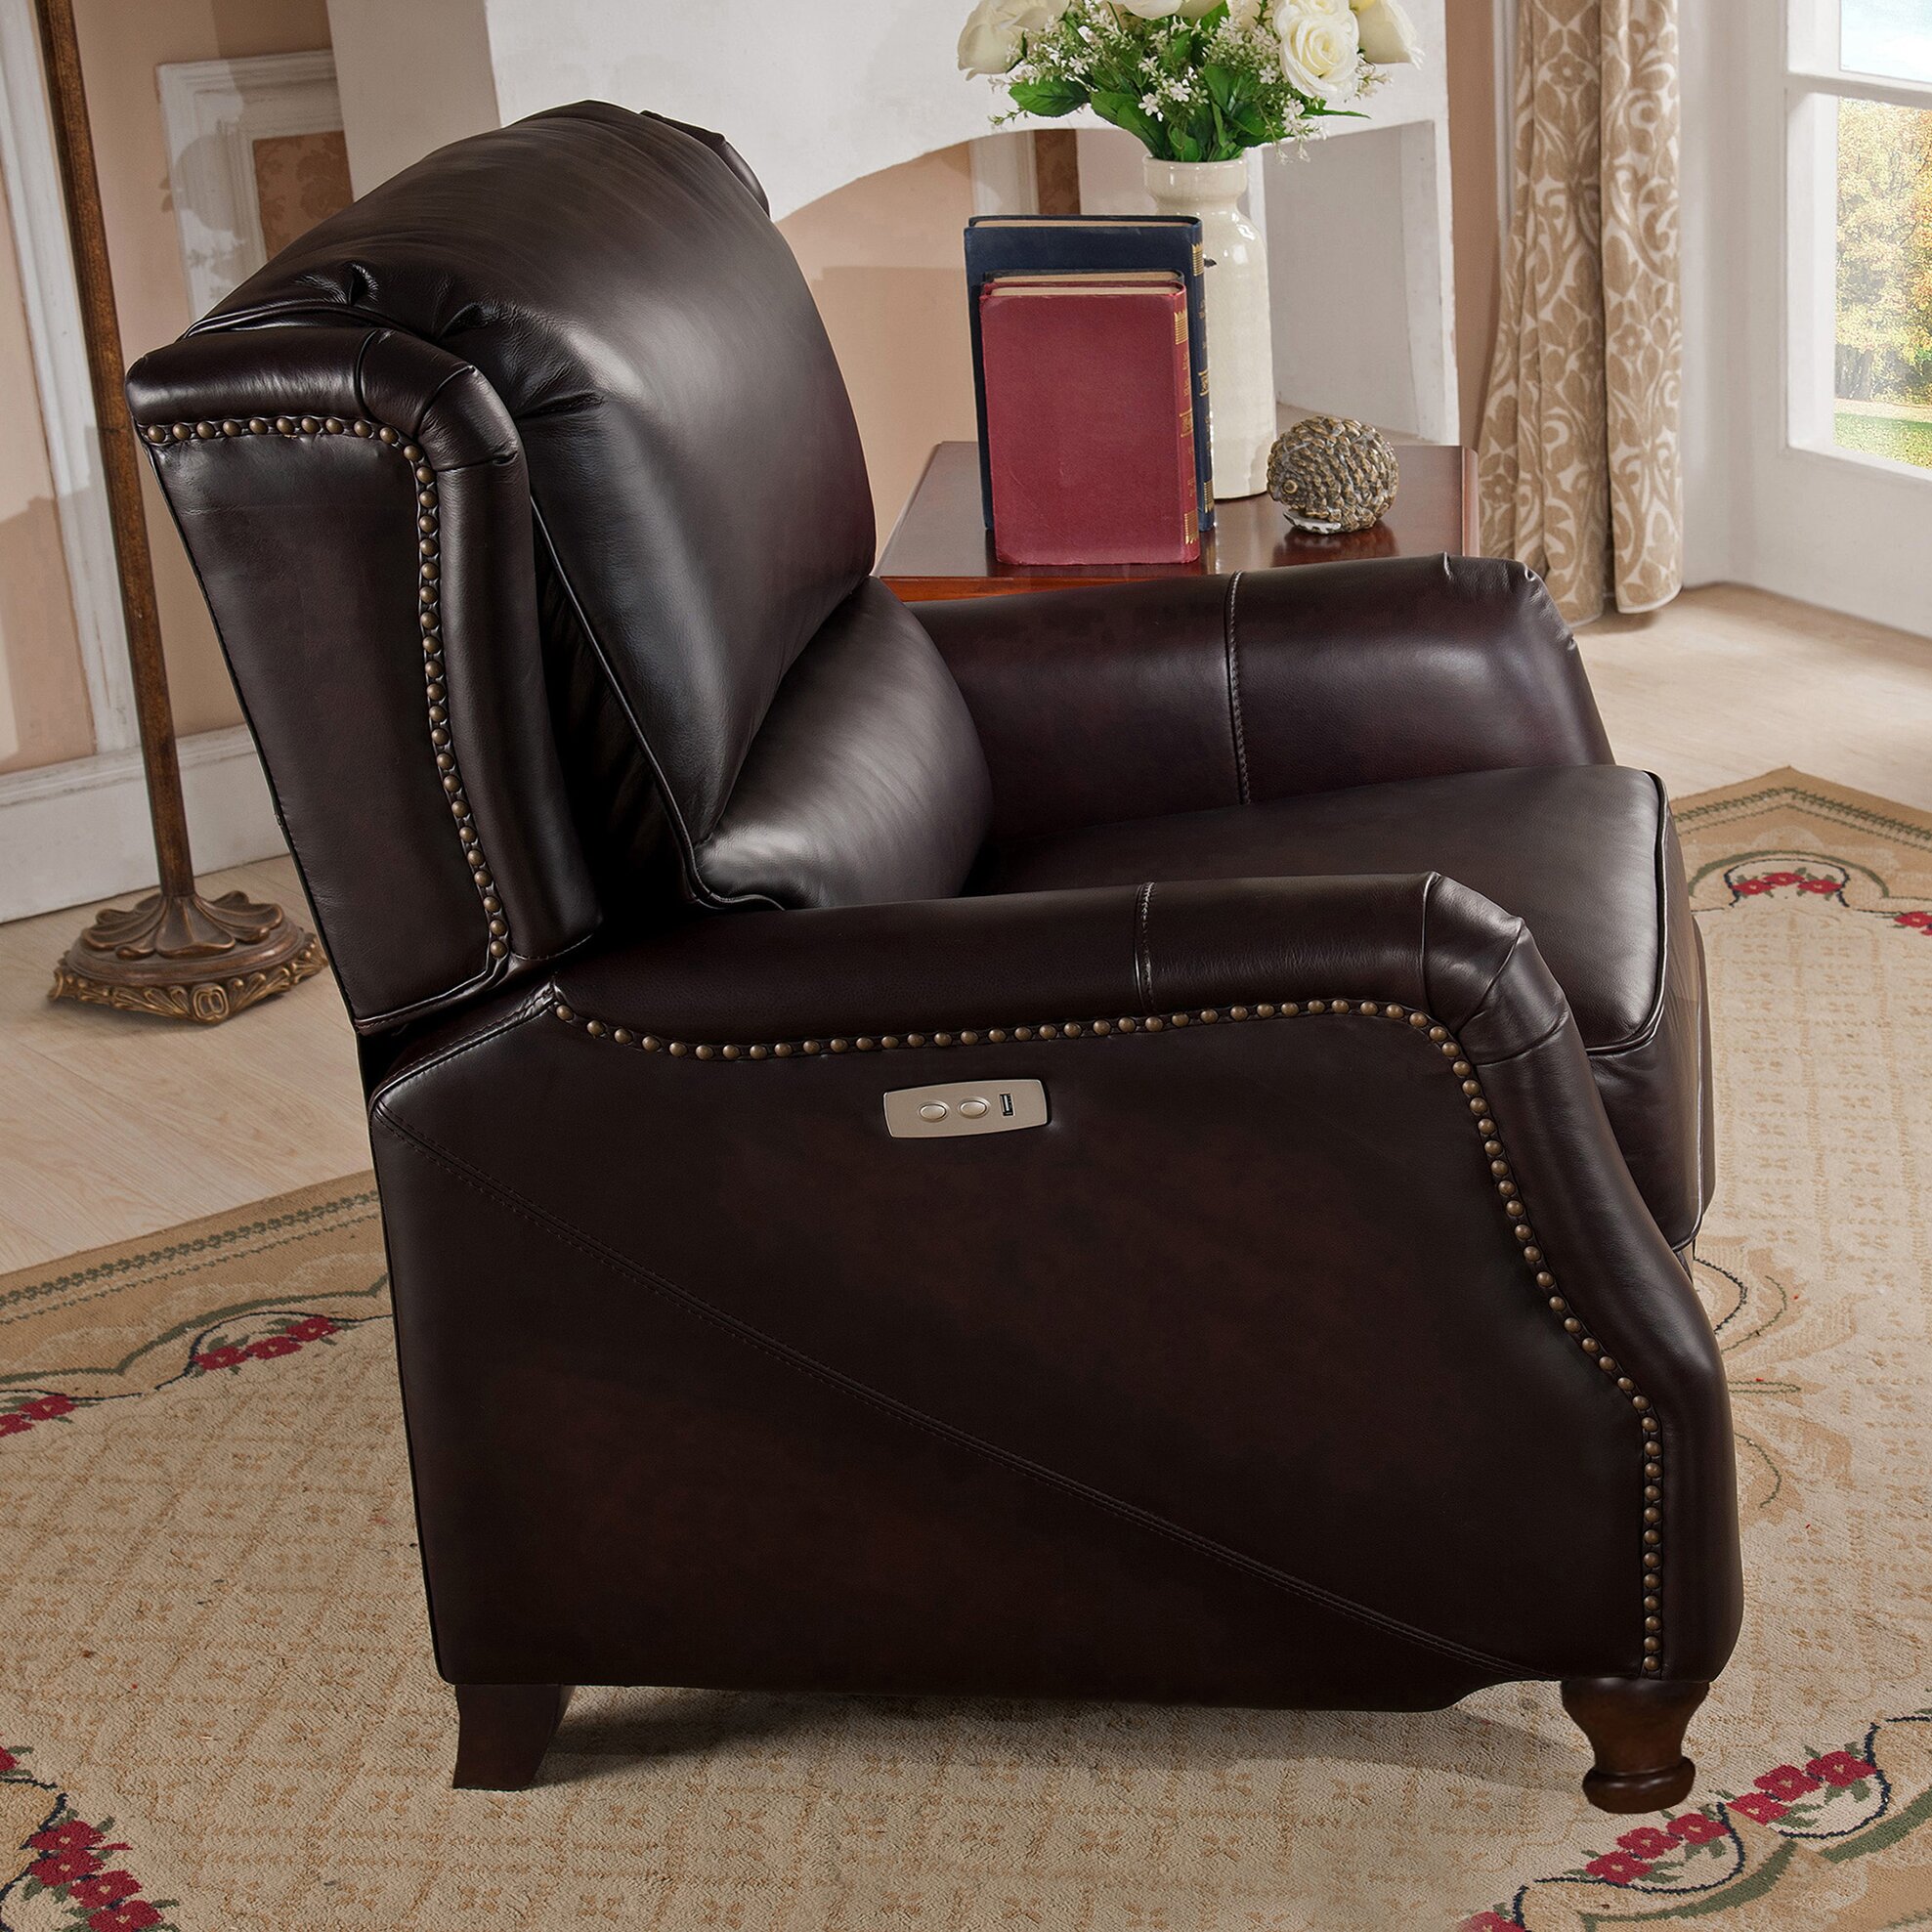 Amax Imperial Leather Power Recliner with USB Port | Wayfair - Amax Imperial Leather Power Recliner with USB Port